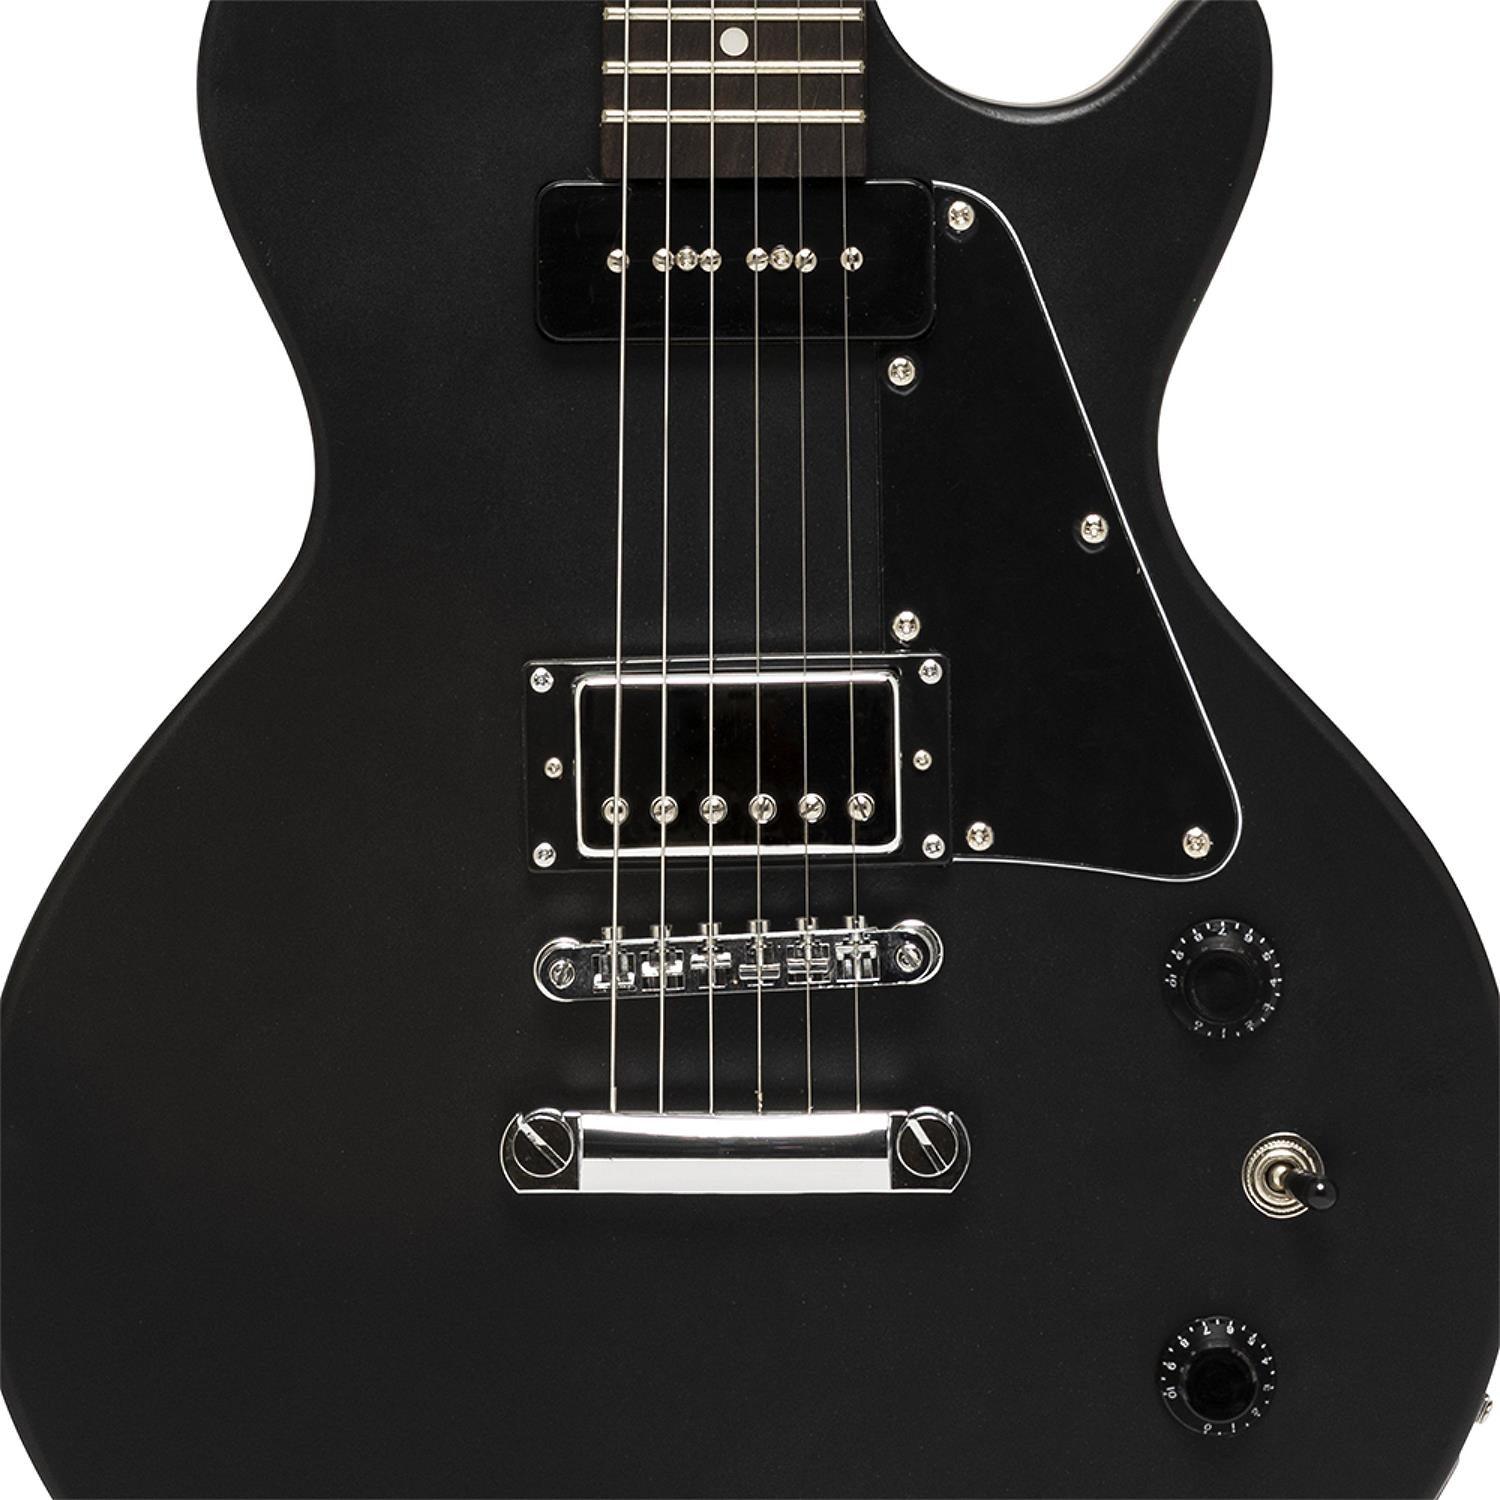 Stagg SEL-HB90 BLK Black Standard Mahogany Electric Guitar - DY Pro Audio